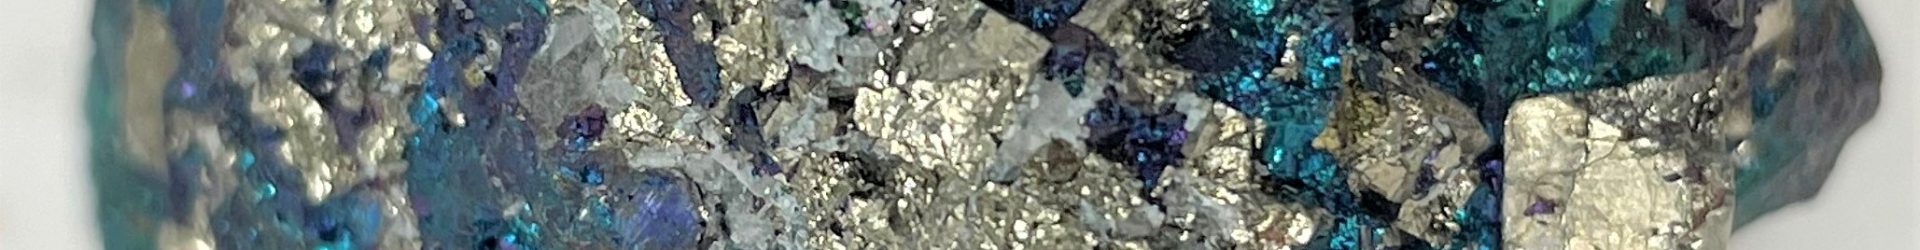 Peacock Ore with Pyrite